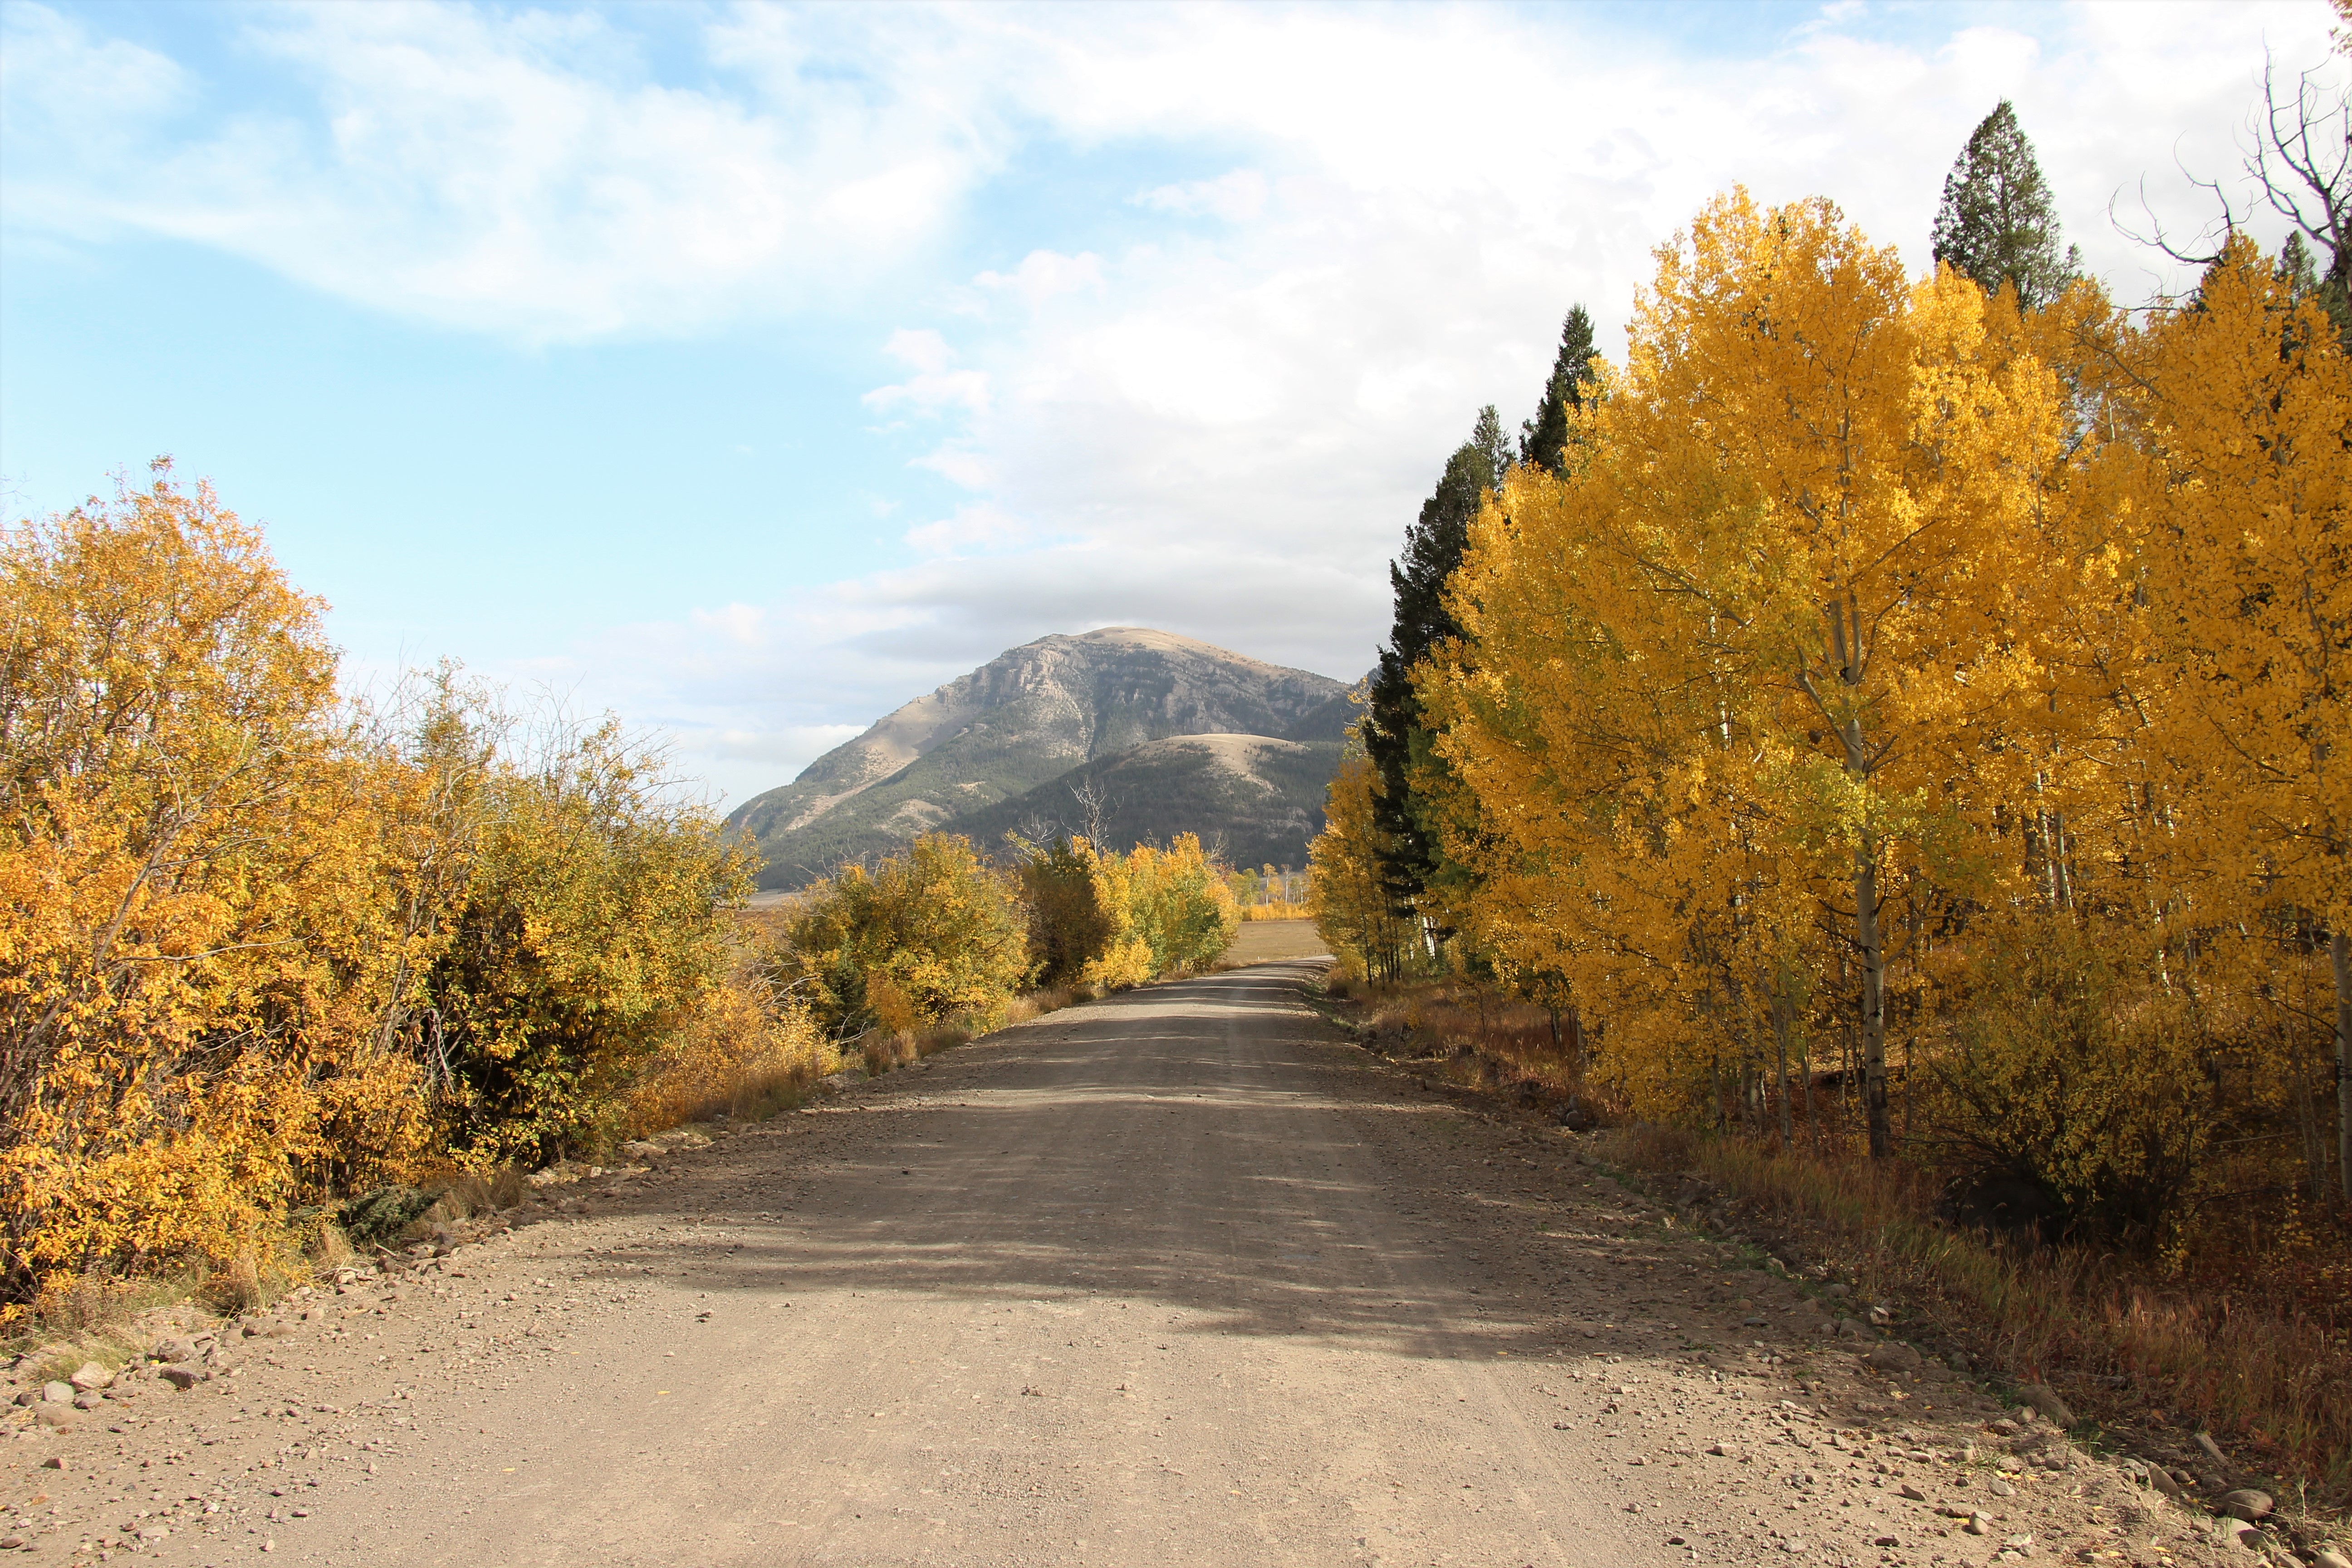 Vivid yellow aspen trees along a Refuge road with a mountain in the background.